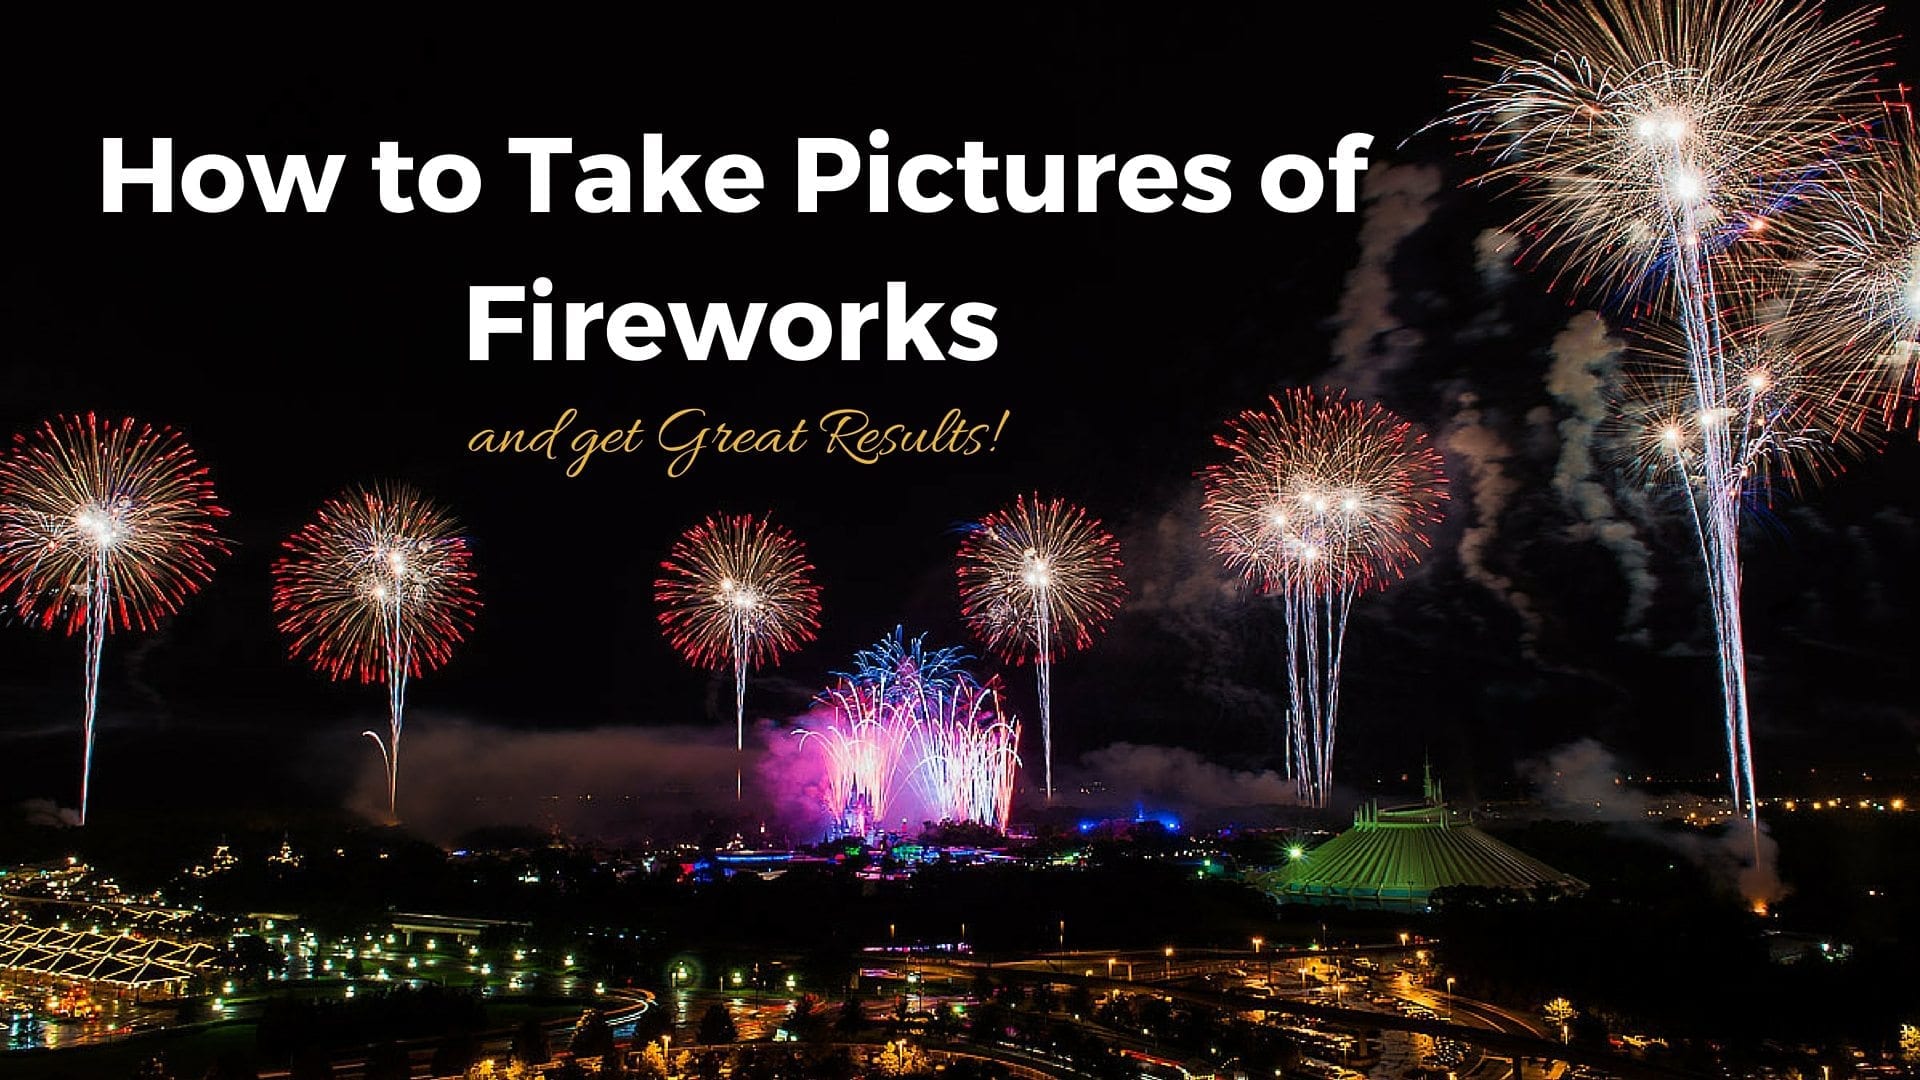 How to Take Pictures of Fireworks